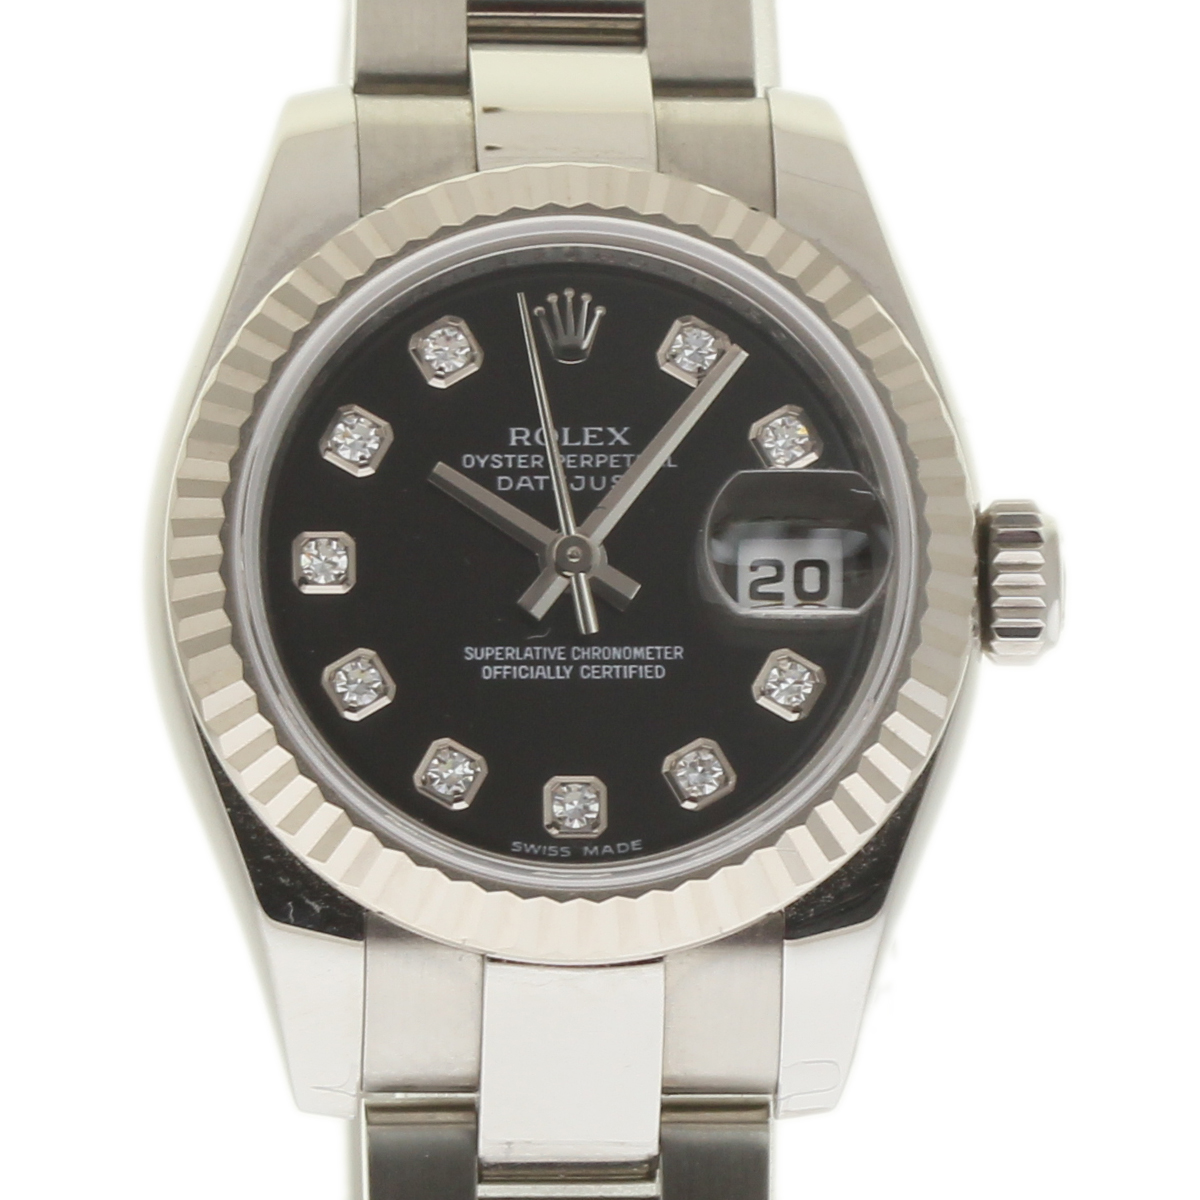 Lady's Datejust in 2-Tone Fluted Bezel on Oyster Bracelet with Black Diamond Dial